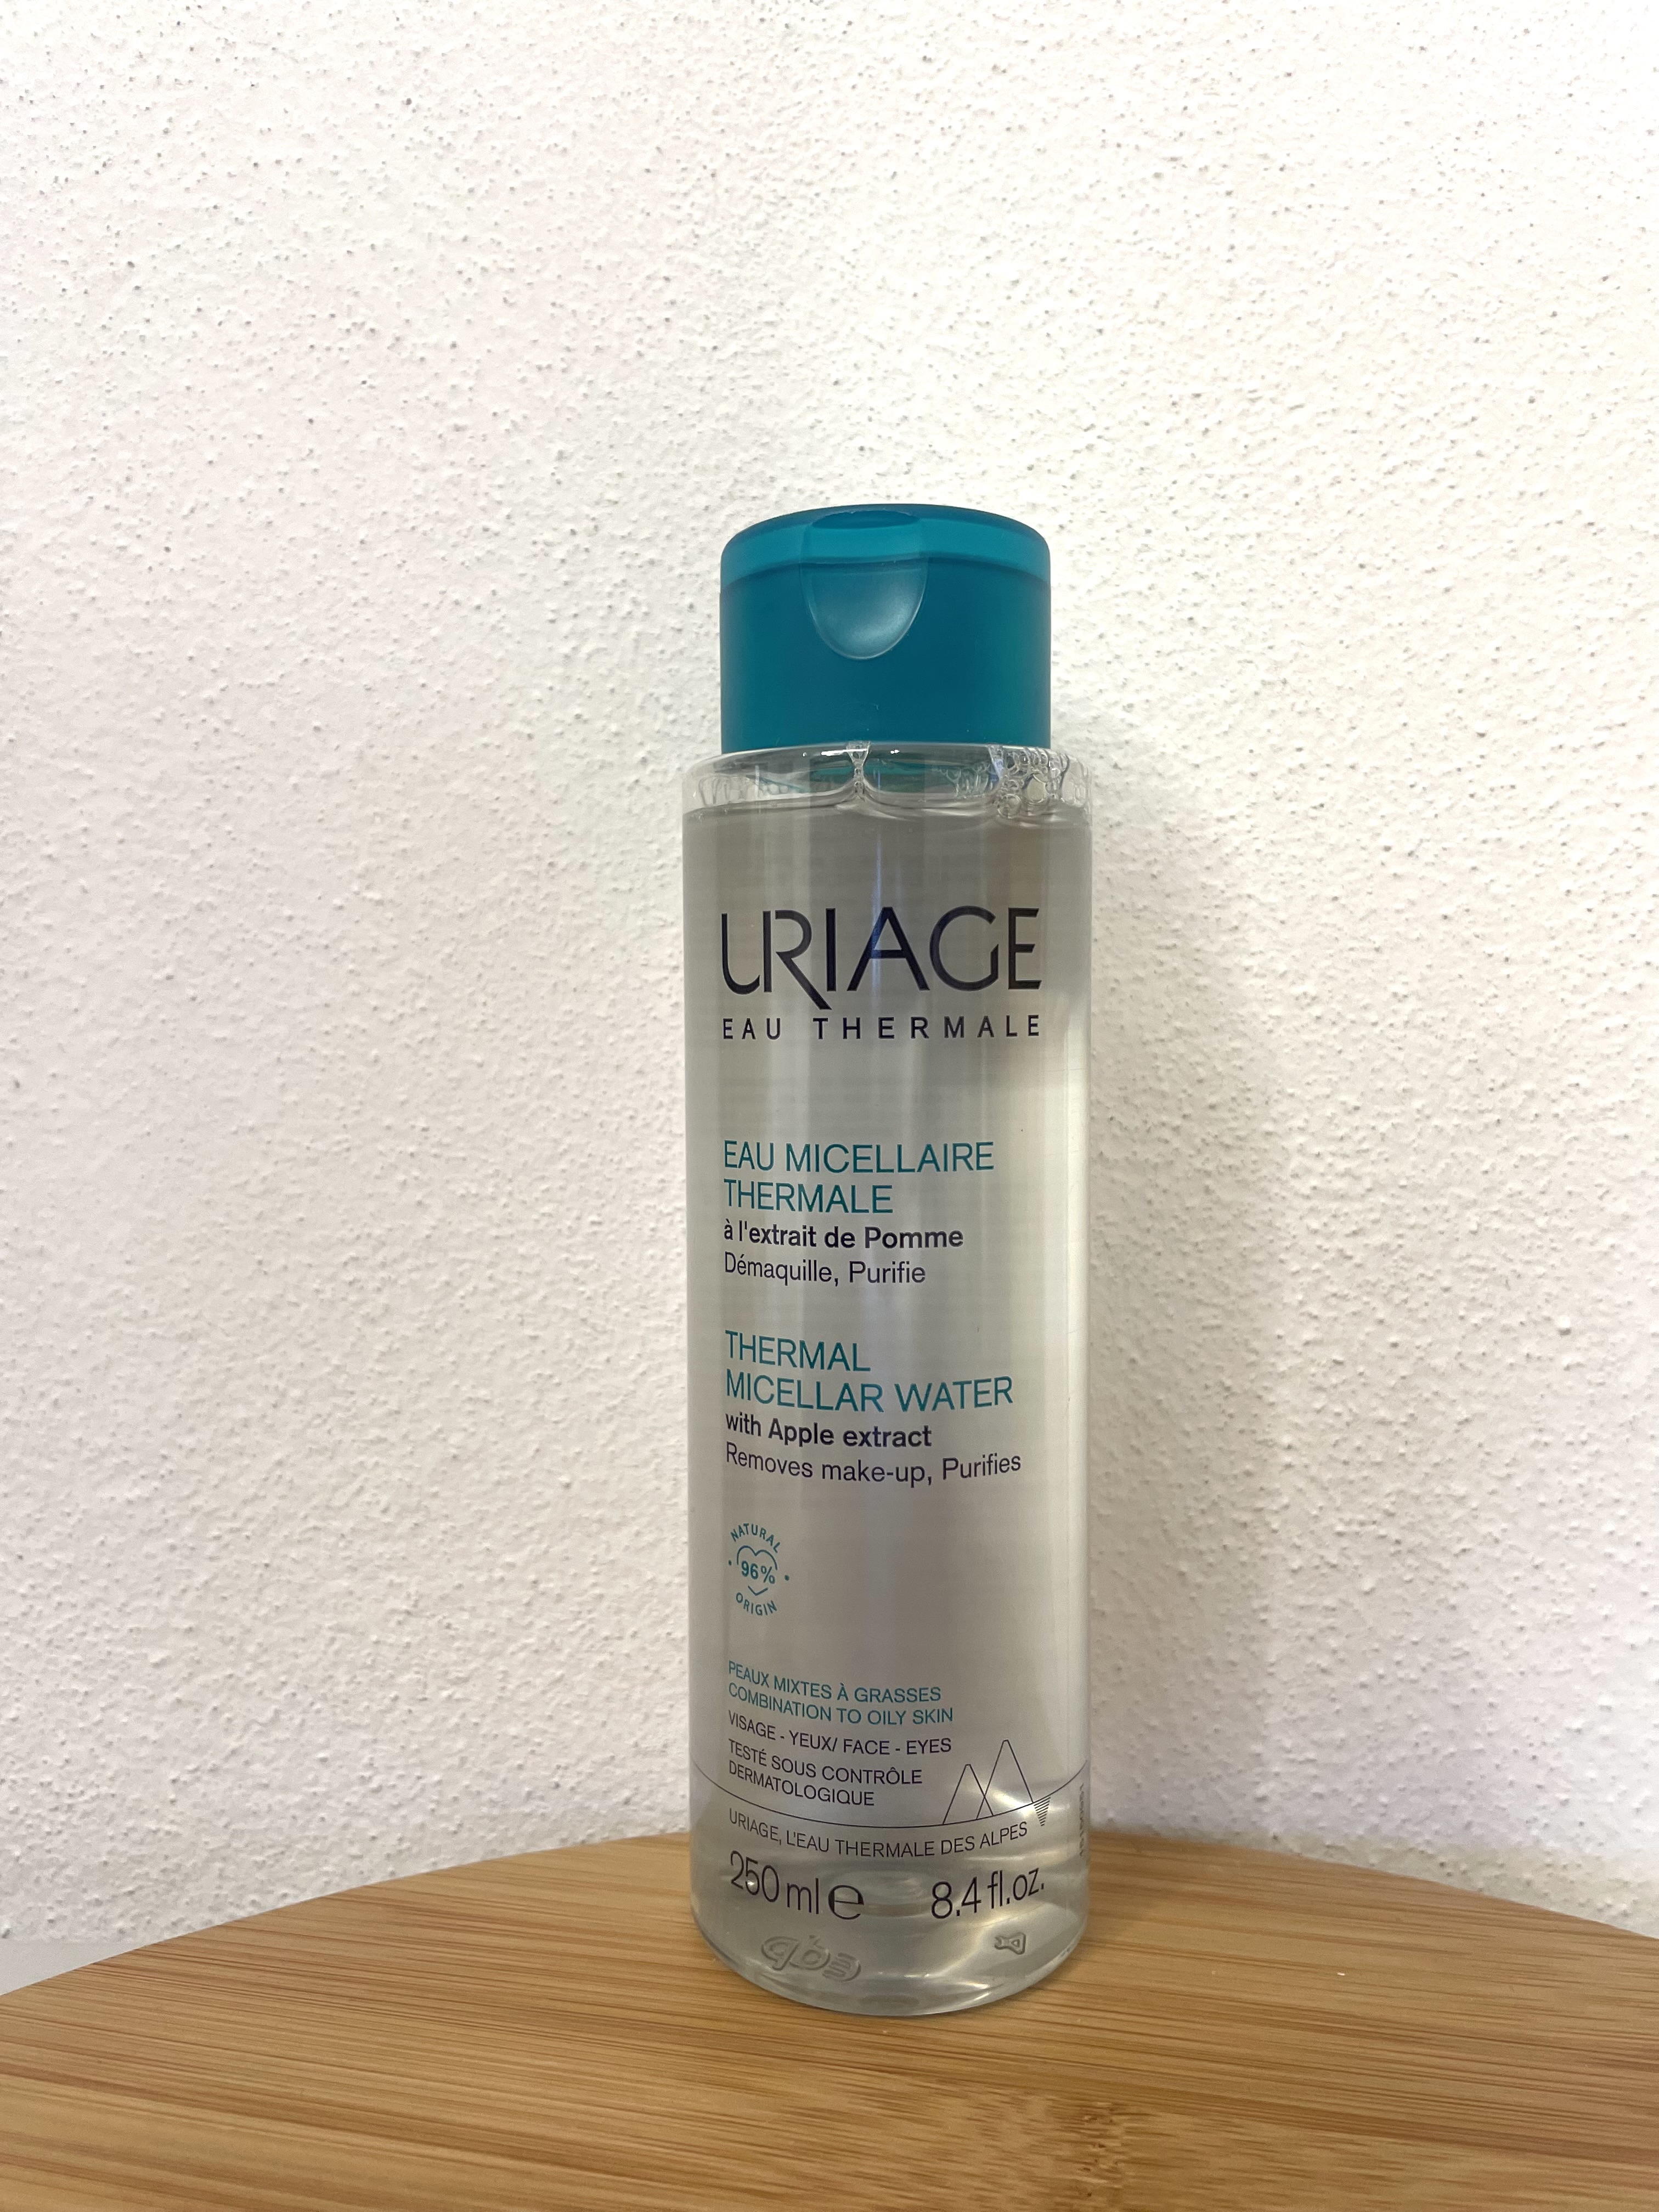 Uriage:  Eau Micellaire Thermale 